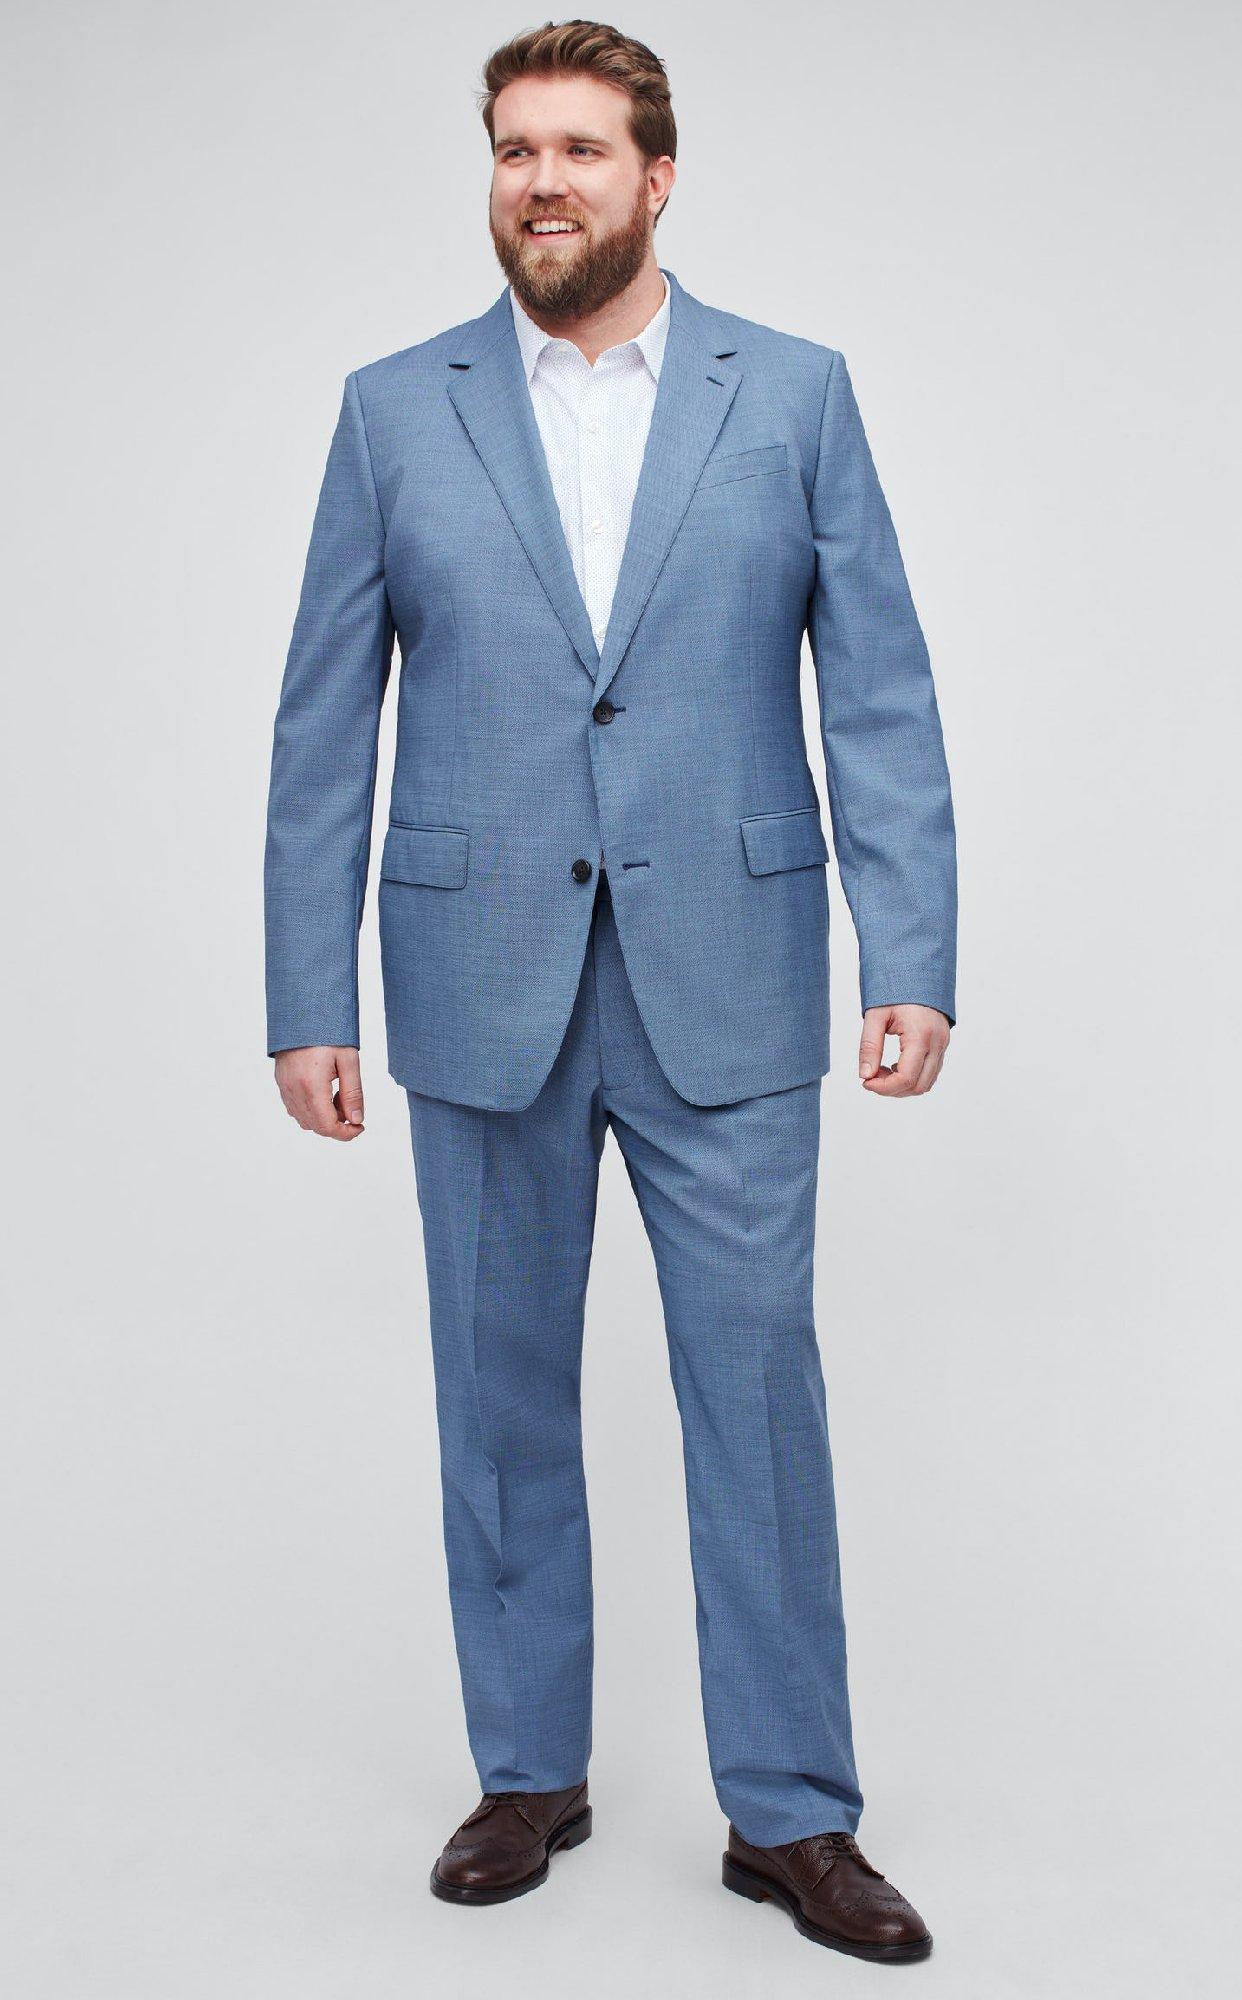 Summer Wedding Suits for Men Ready to Tie the Knot in Style